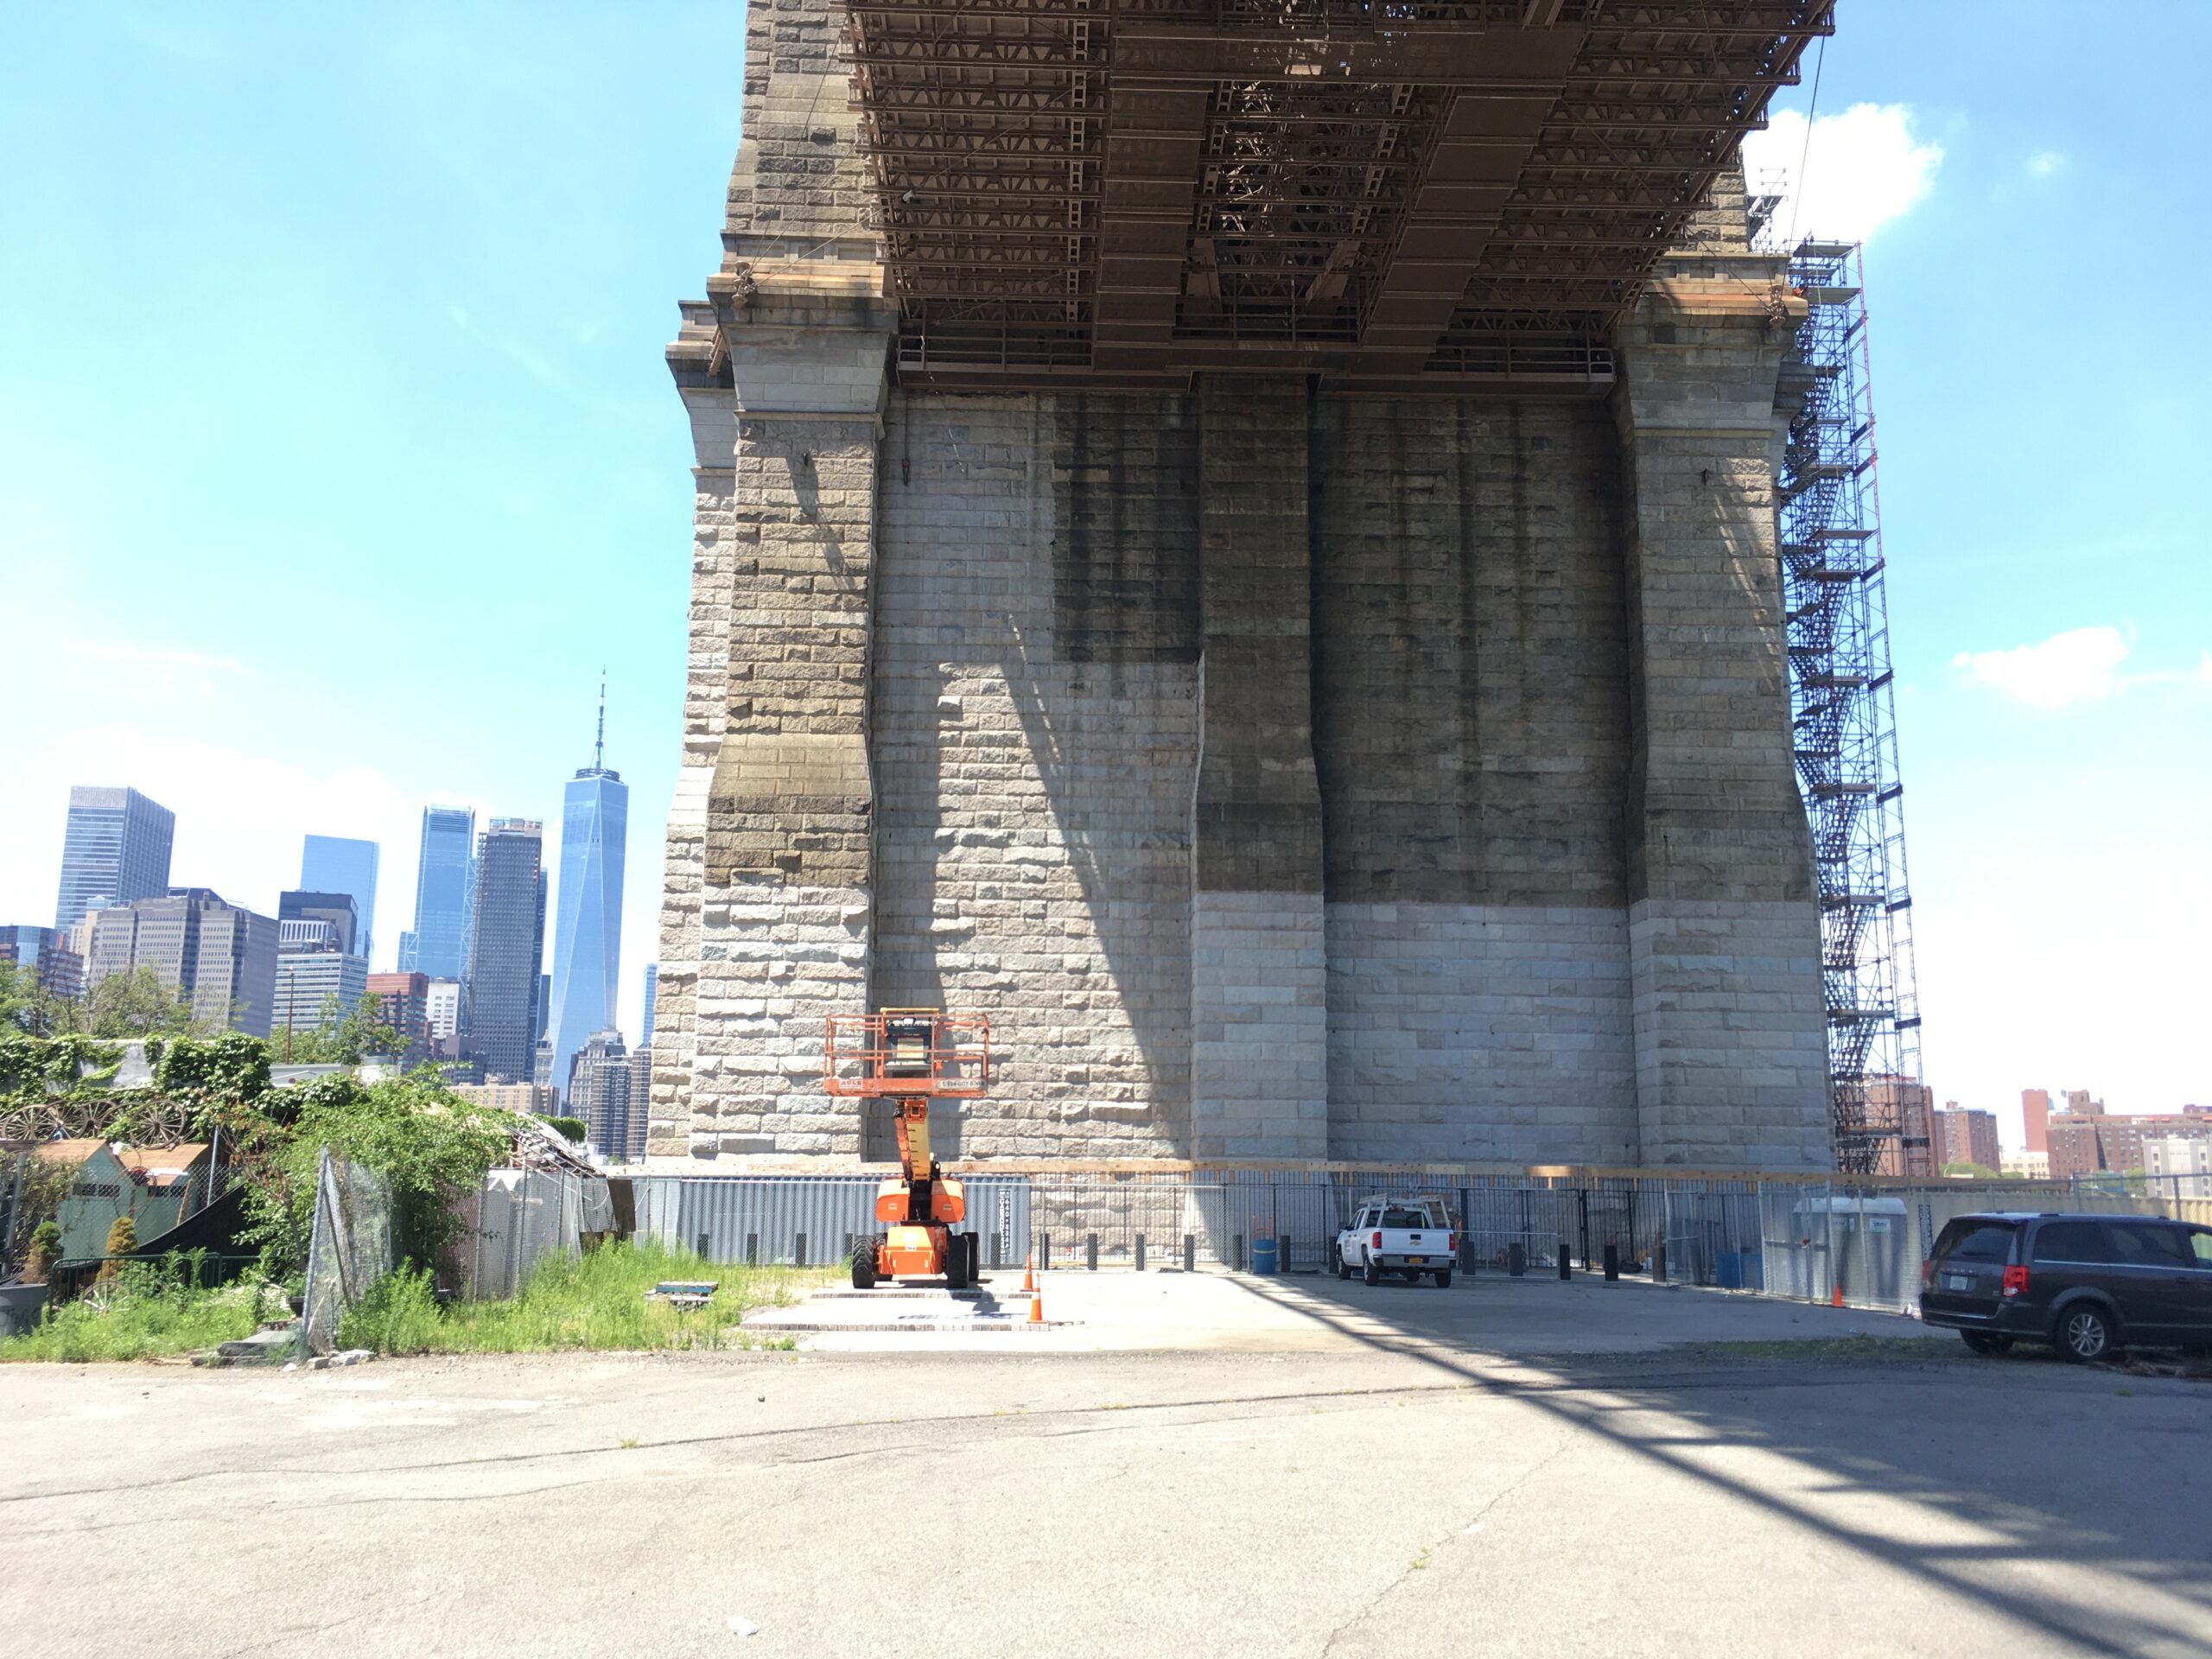 A shot from underneath the bridge shows the contrast of the Brooklyn Tower mid-cleaning.